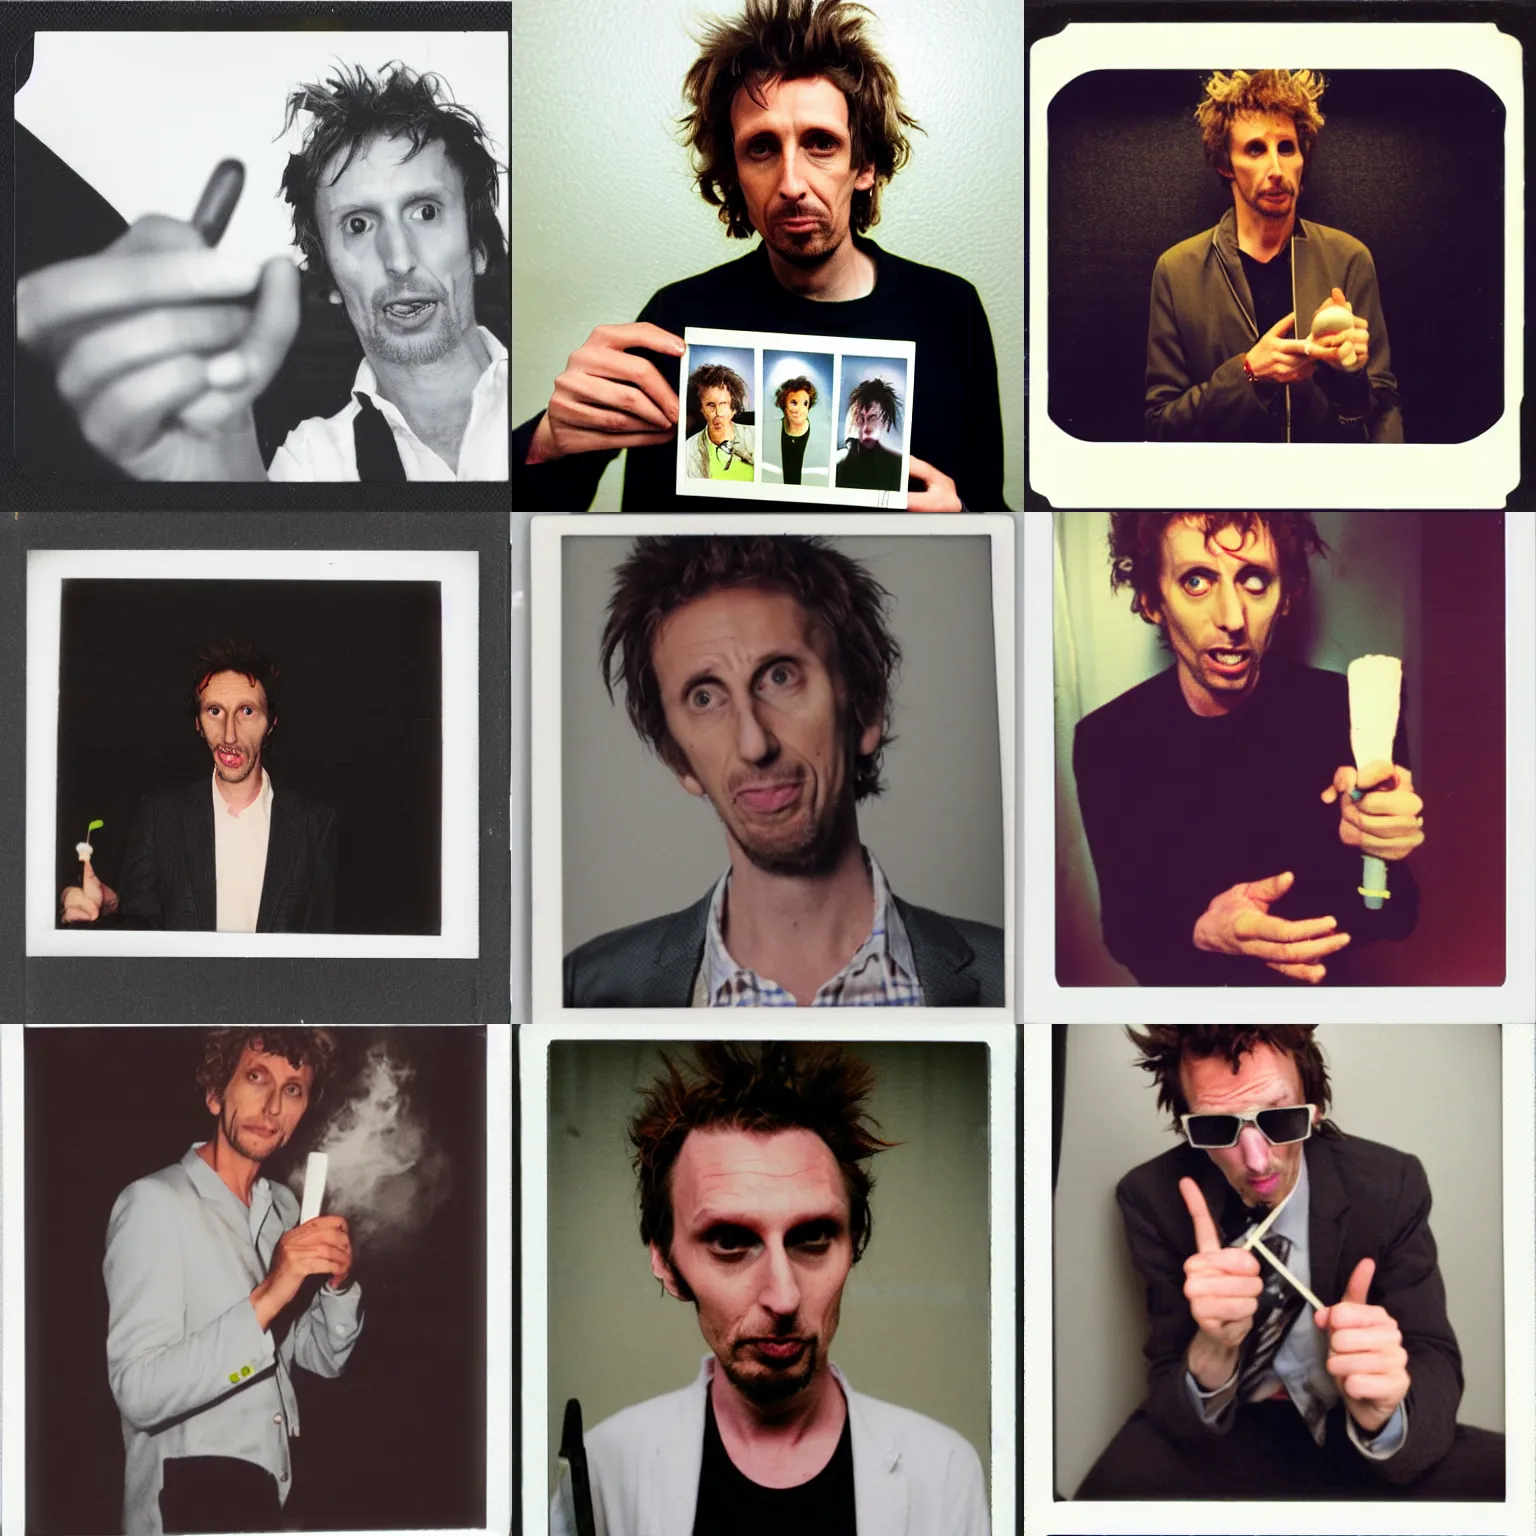 Prompt: Polaroid photograph of Super Hans played by Matt King holding a joint